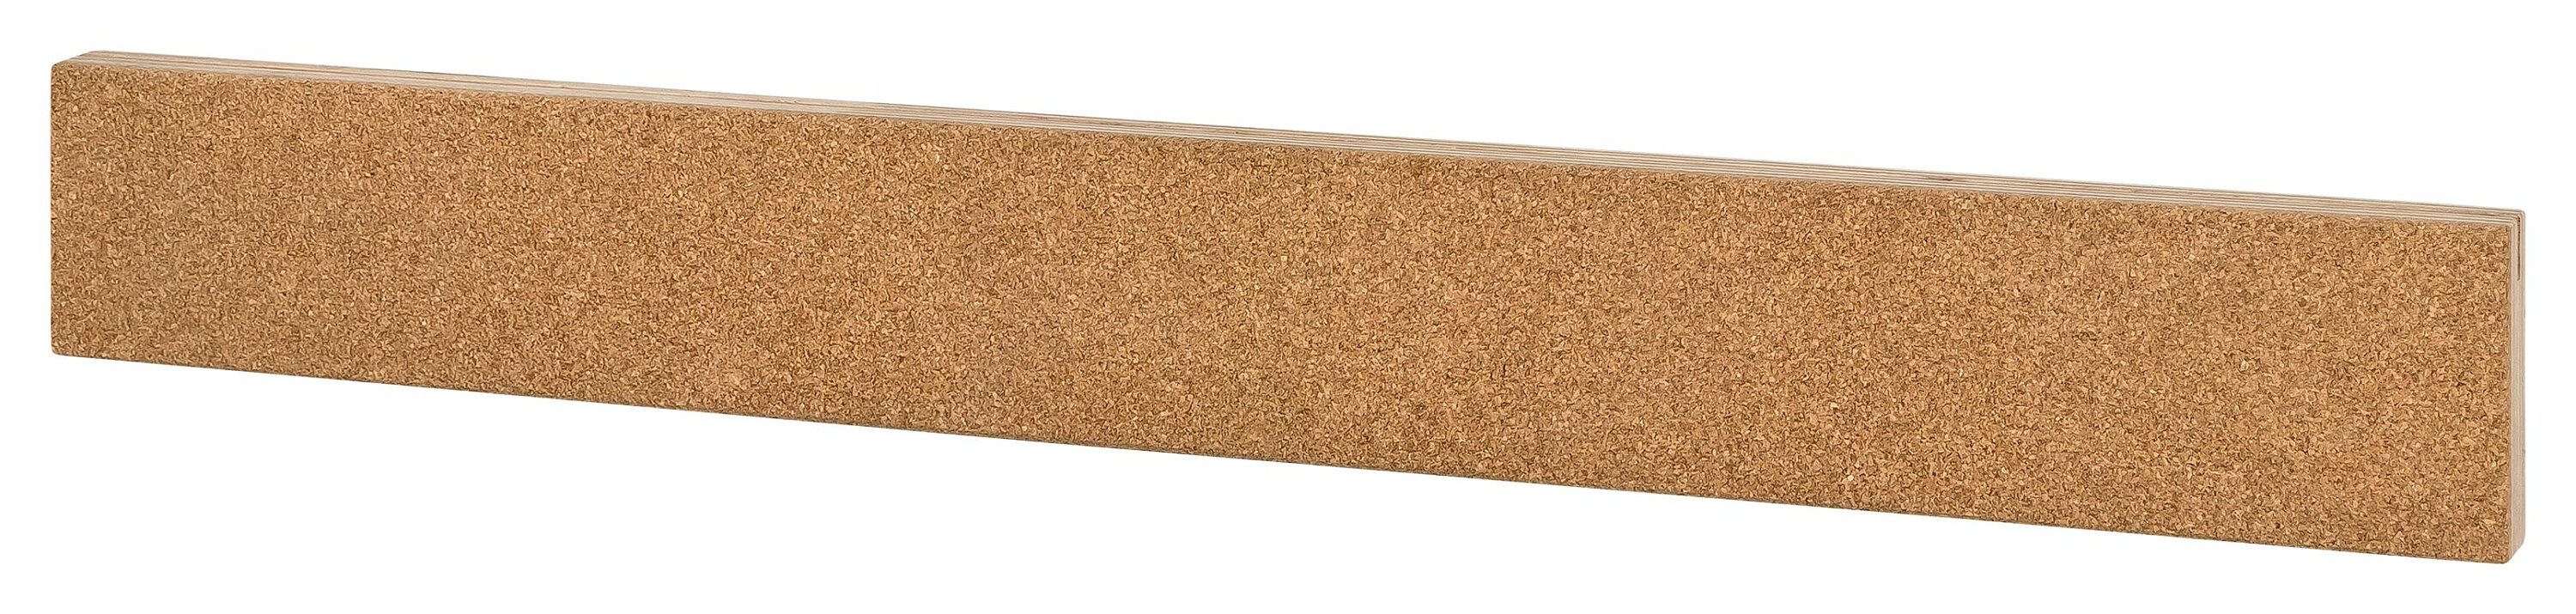 Pin Board Strip Made of Cork Picture Bar for Photos Cork Pin Board Strip  for Kitchen, Office & Classroom Memo Made in Germany 